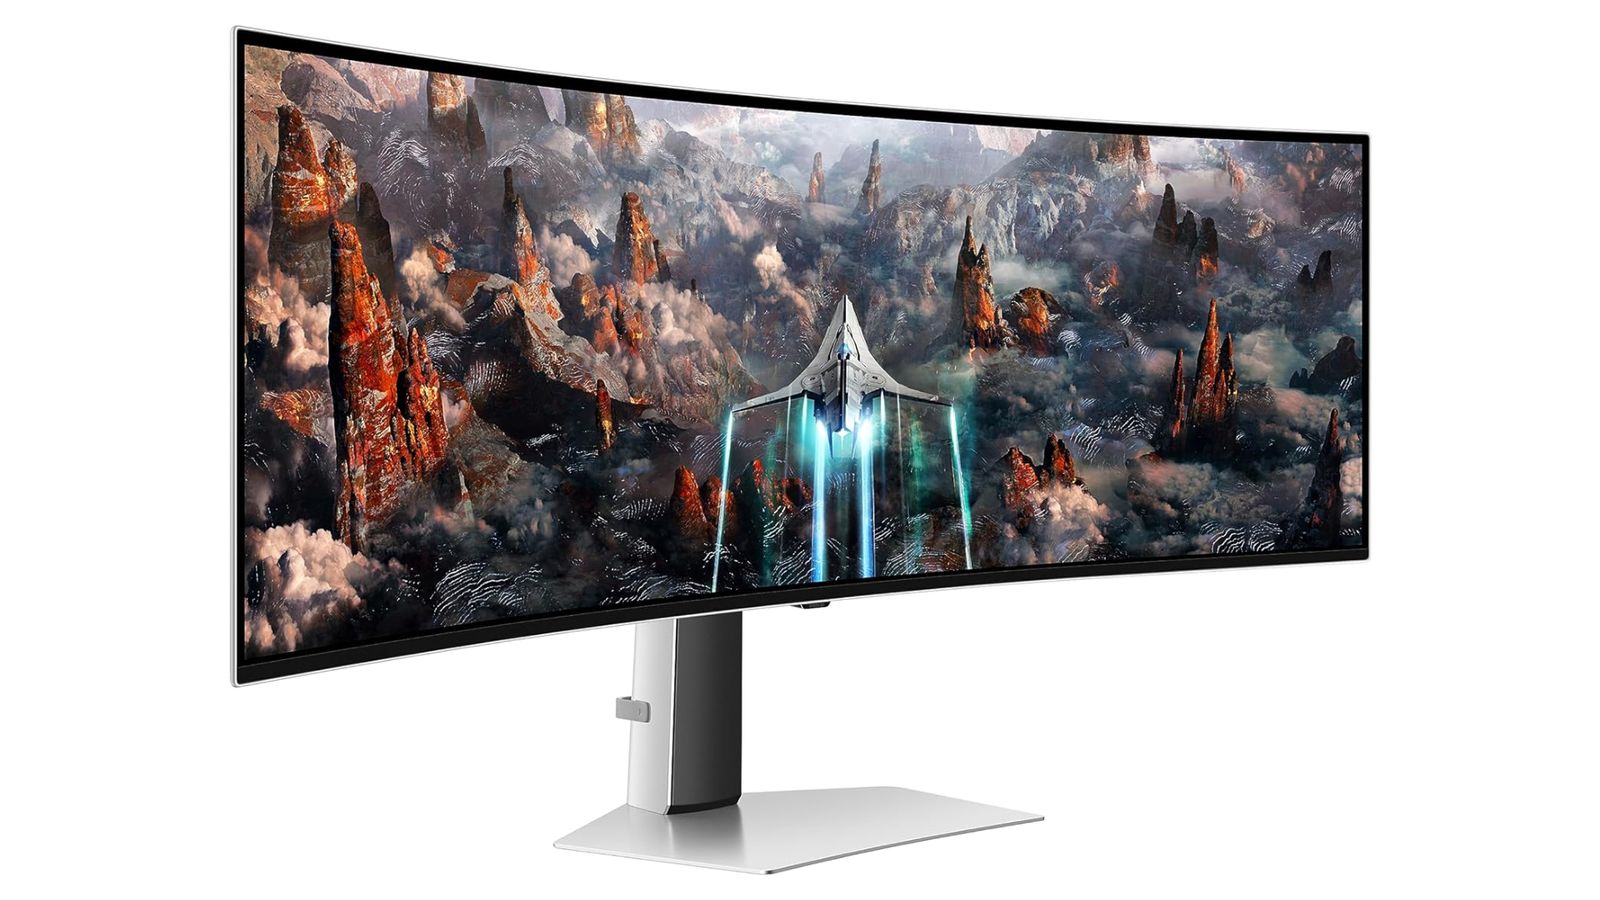 Samsung Odyssey G93SC product image of a silver and black ultrawide monitor with a silver spaceship on the display.